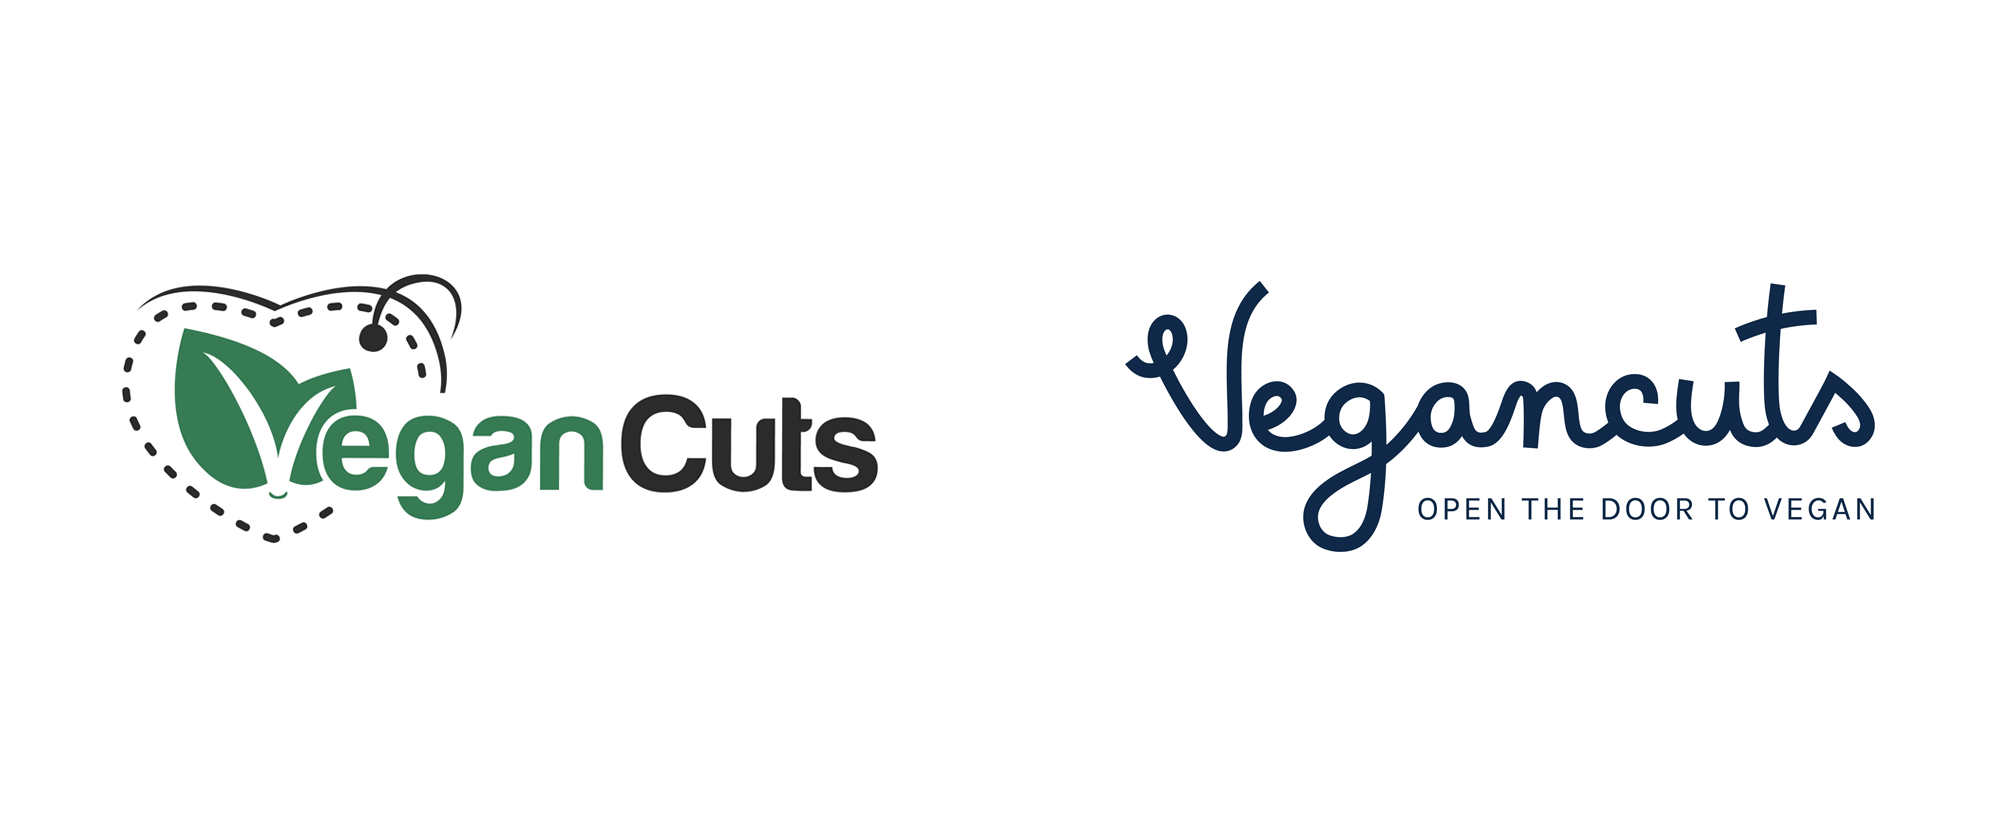 New Logo and Identity for Vegancuts by Joana Mendes